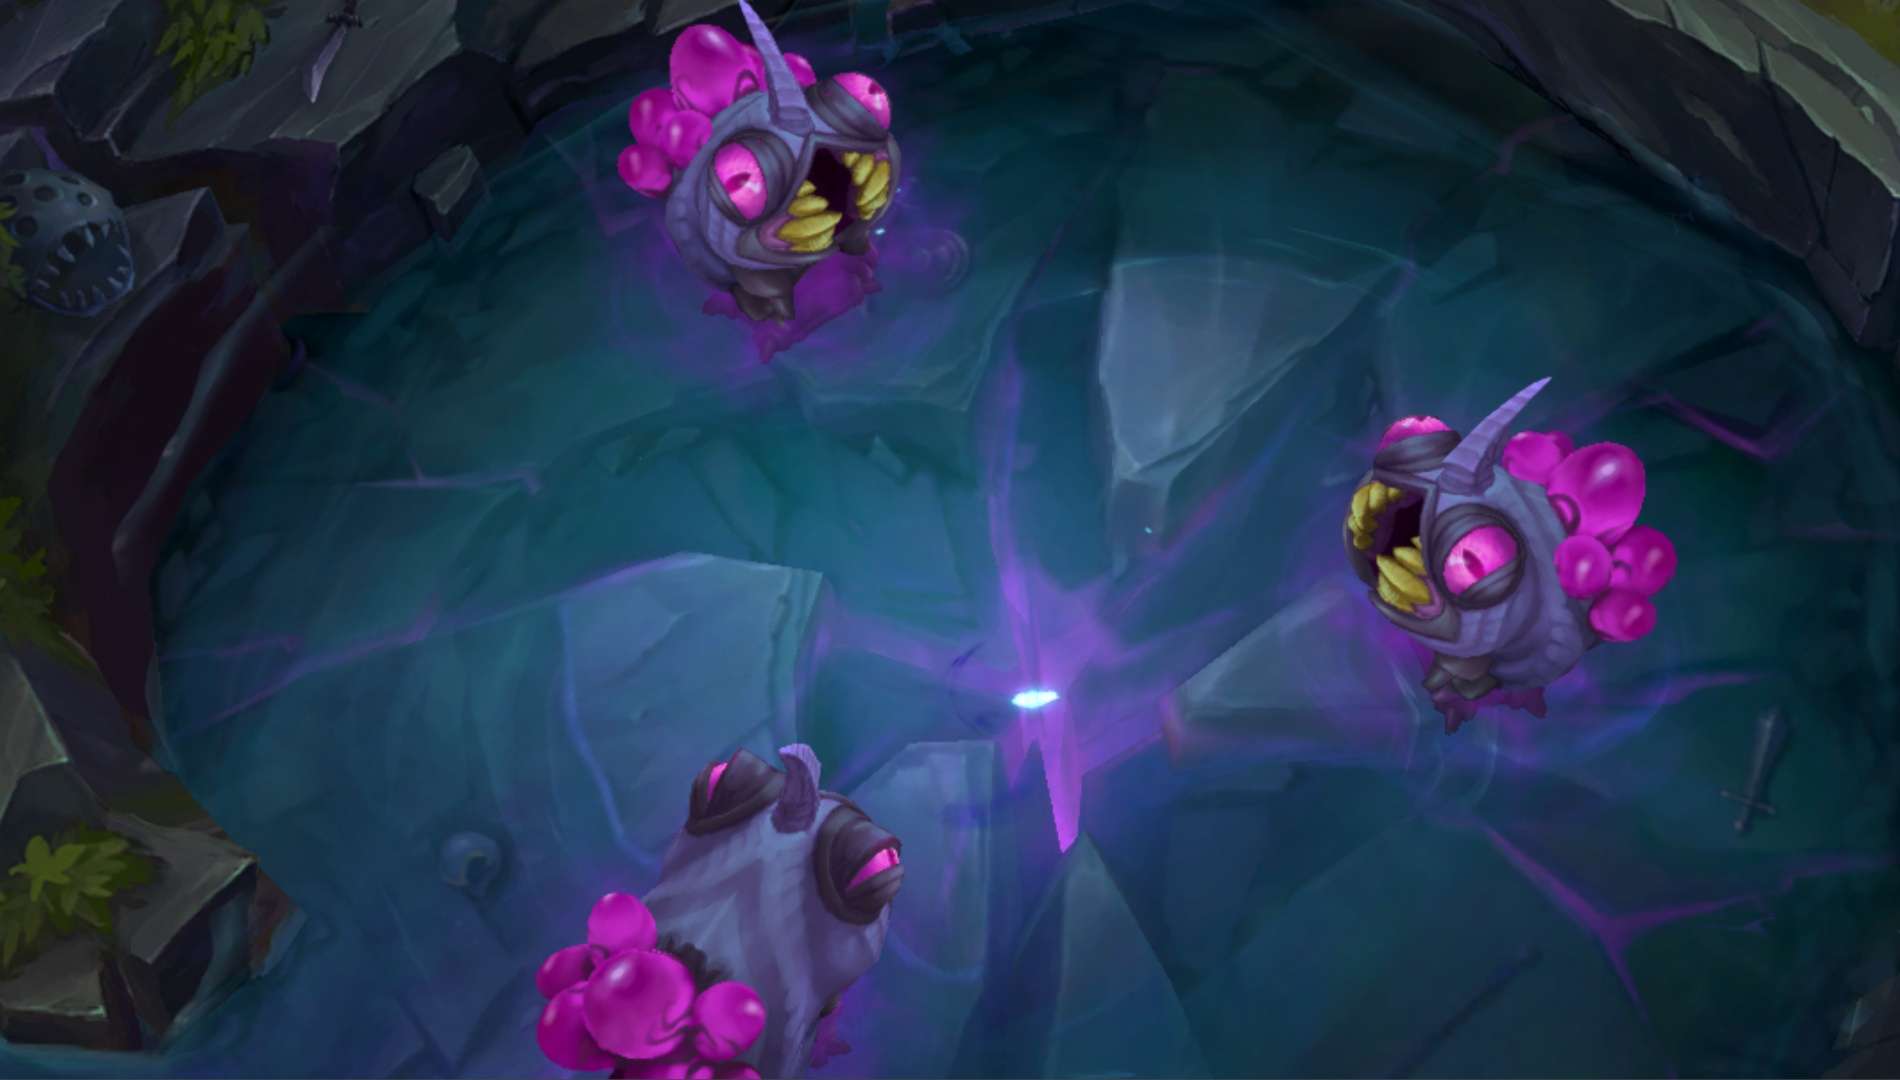 A screenshot from the game League of Legends